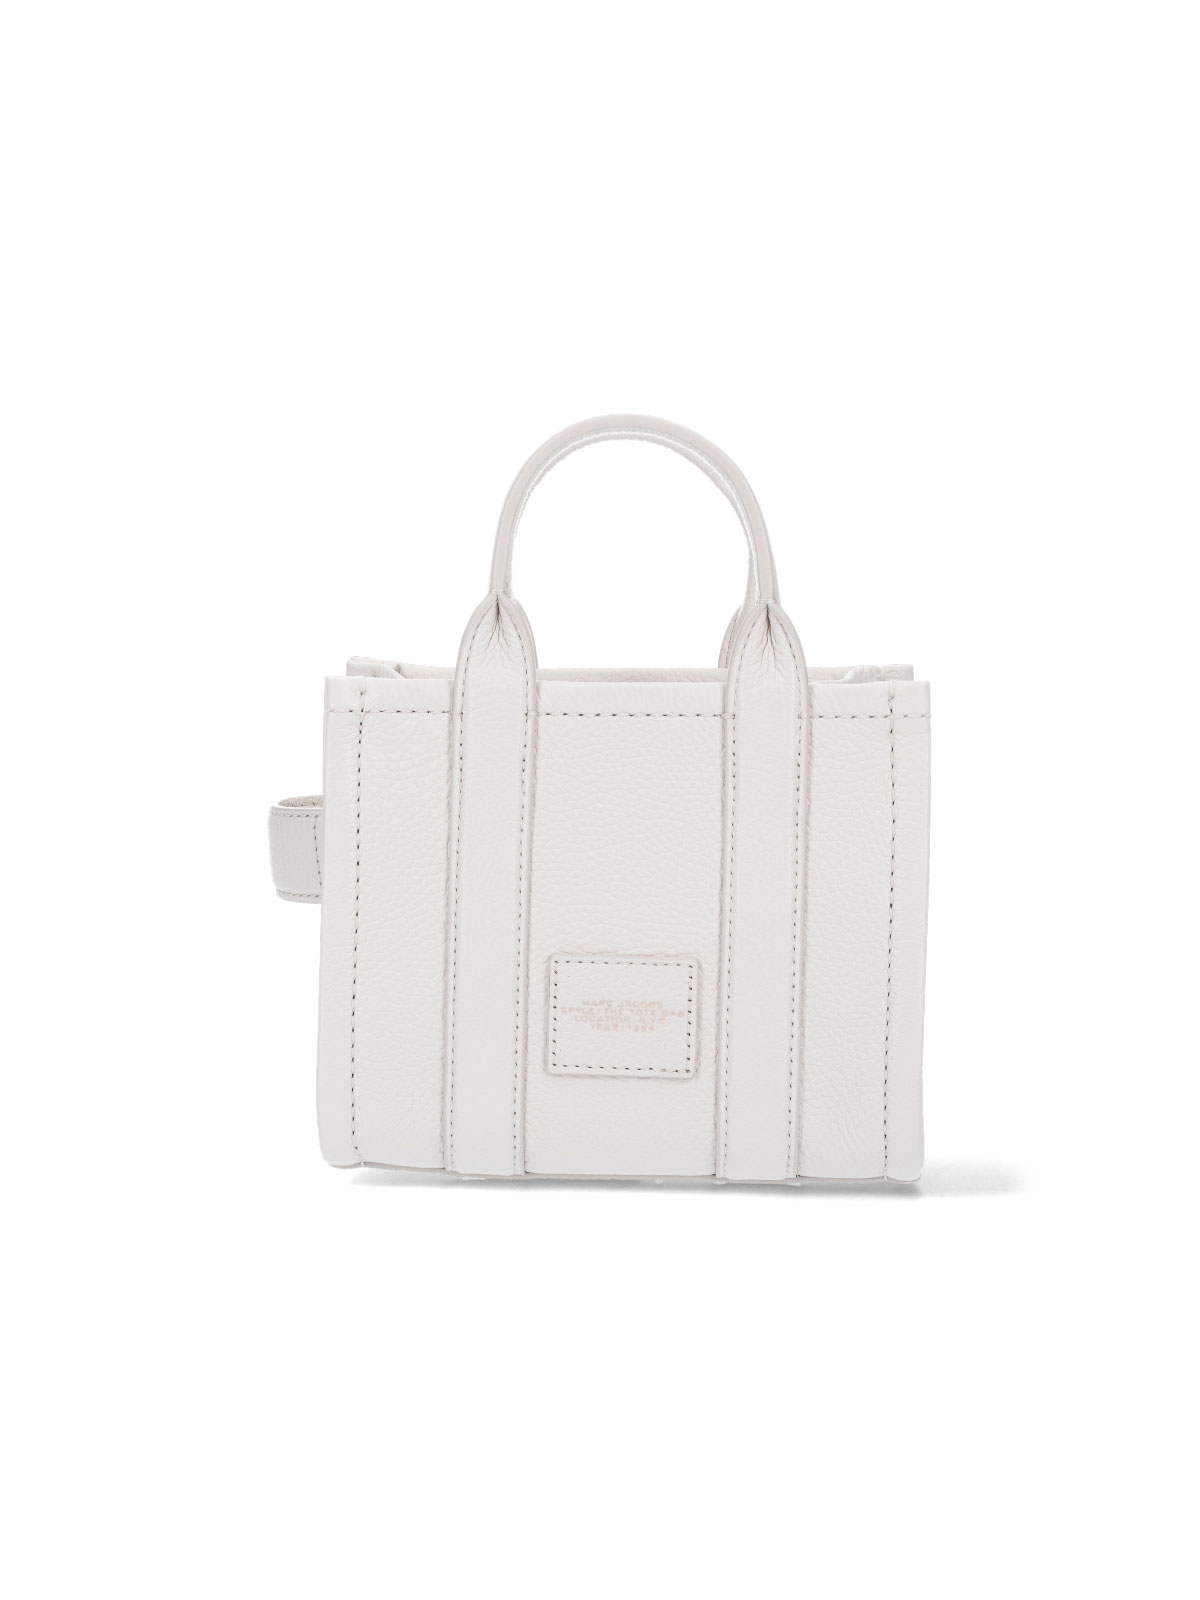 Shop Marc Jacobs Tote Bag In White